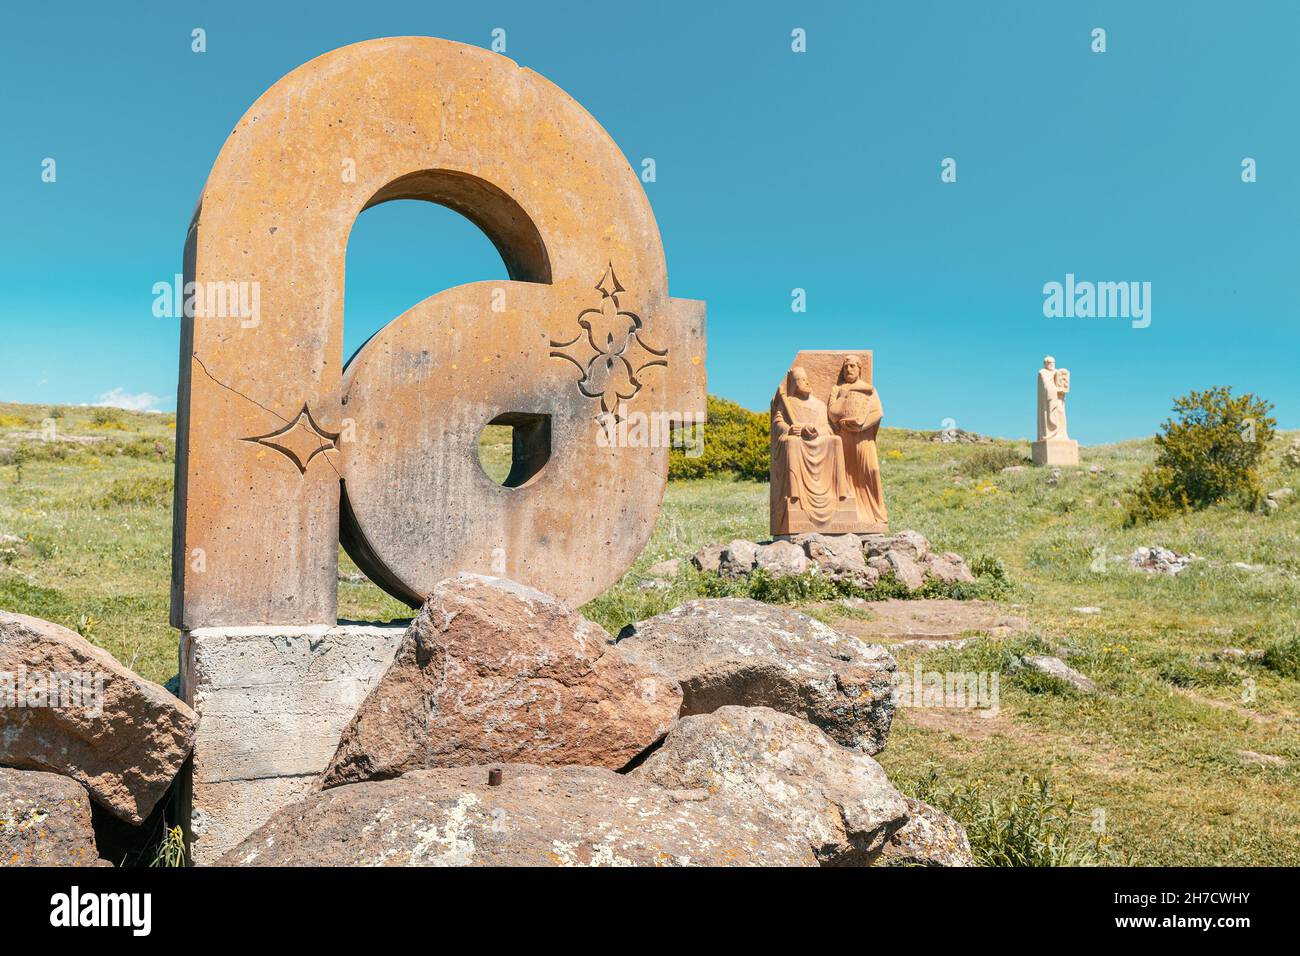 Letters of the Armenian alphabet for preschoolers stitched from felt fabric  Stock Photo - Alamy